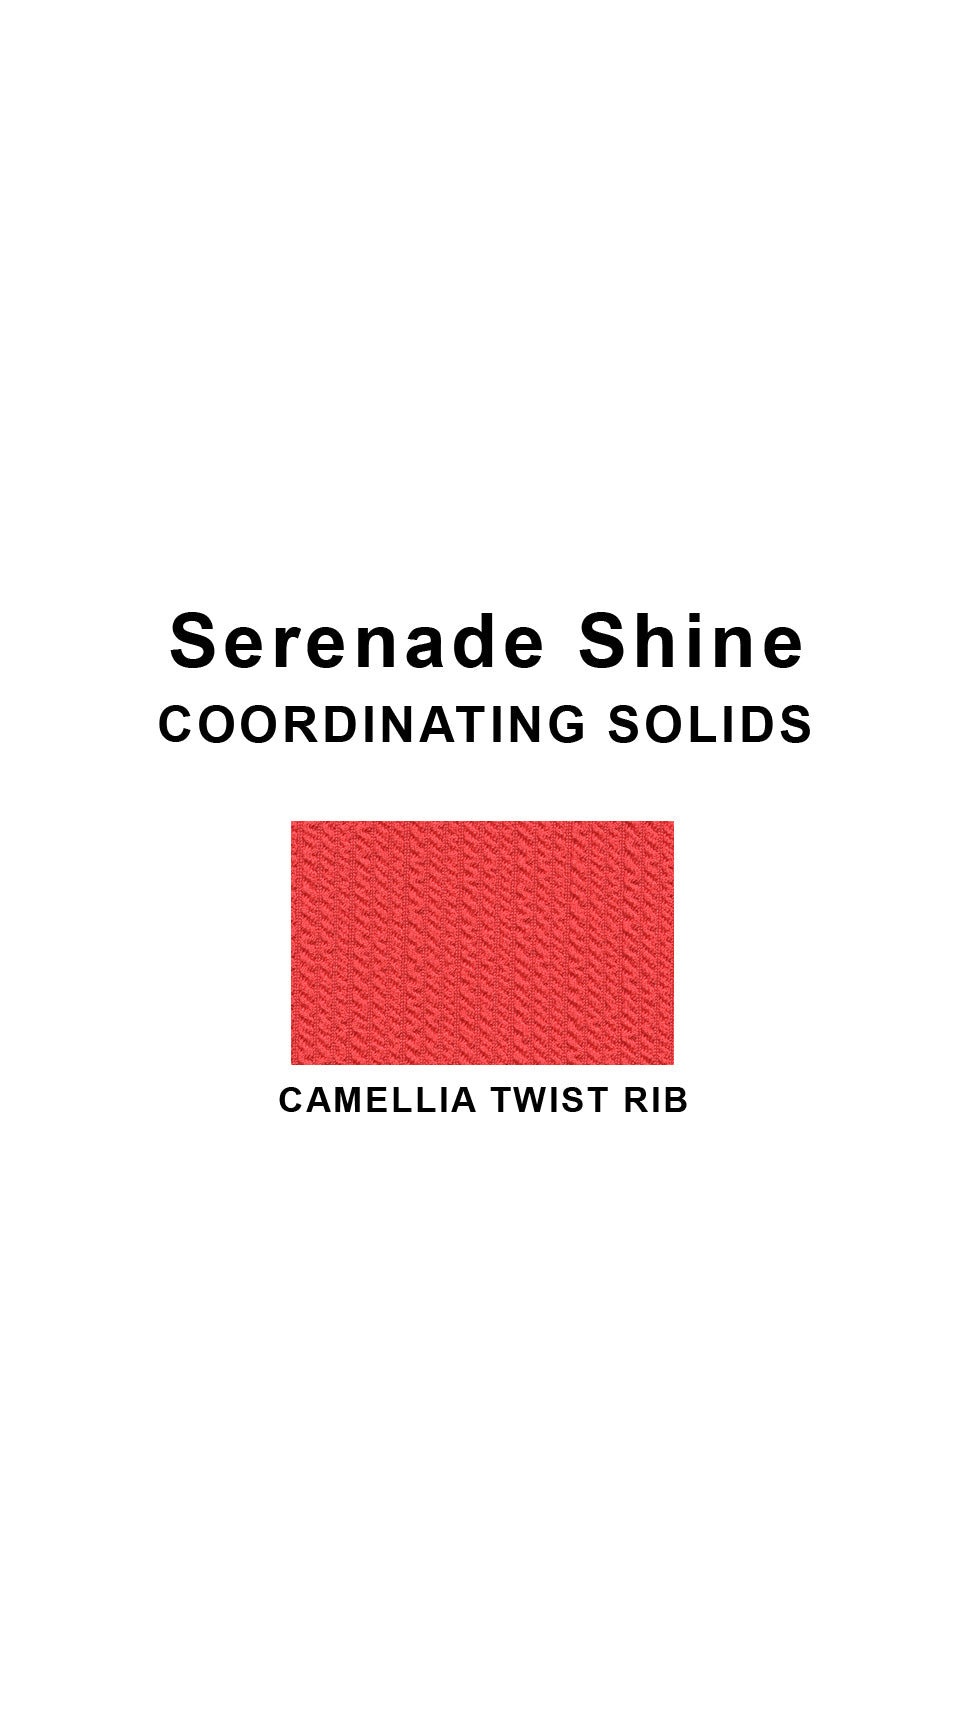 Coordinating solids chart for Serenade Shine swimsuit print: Camellia Twist Rib